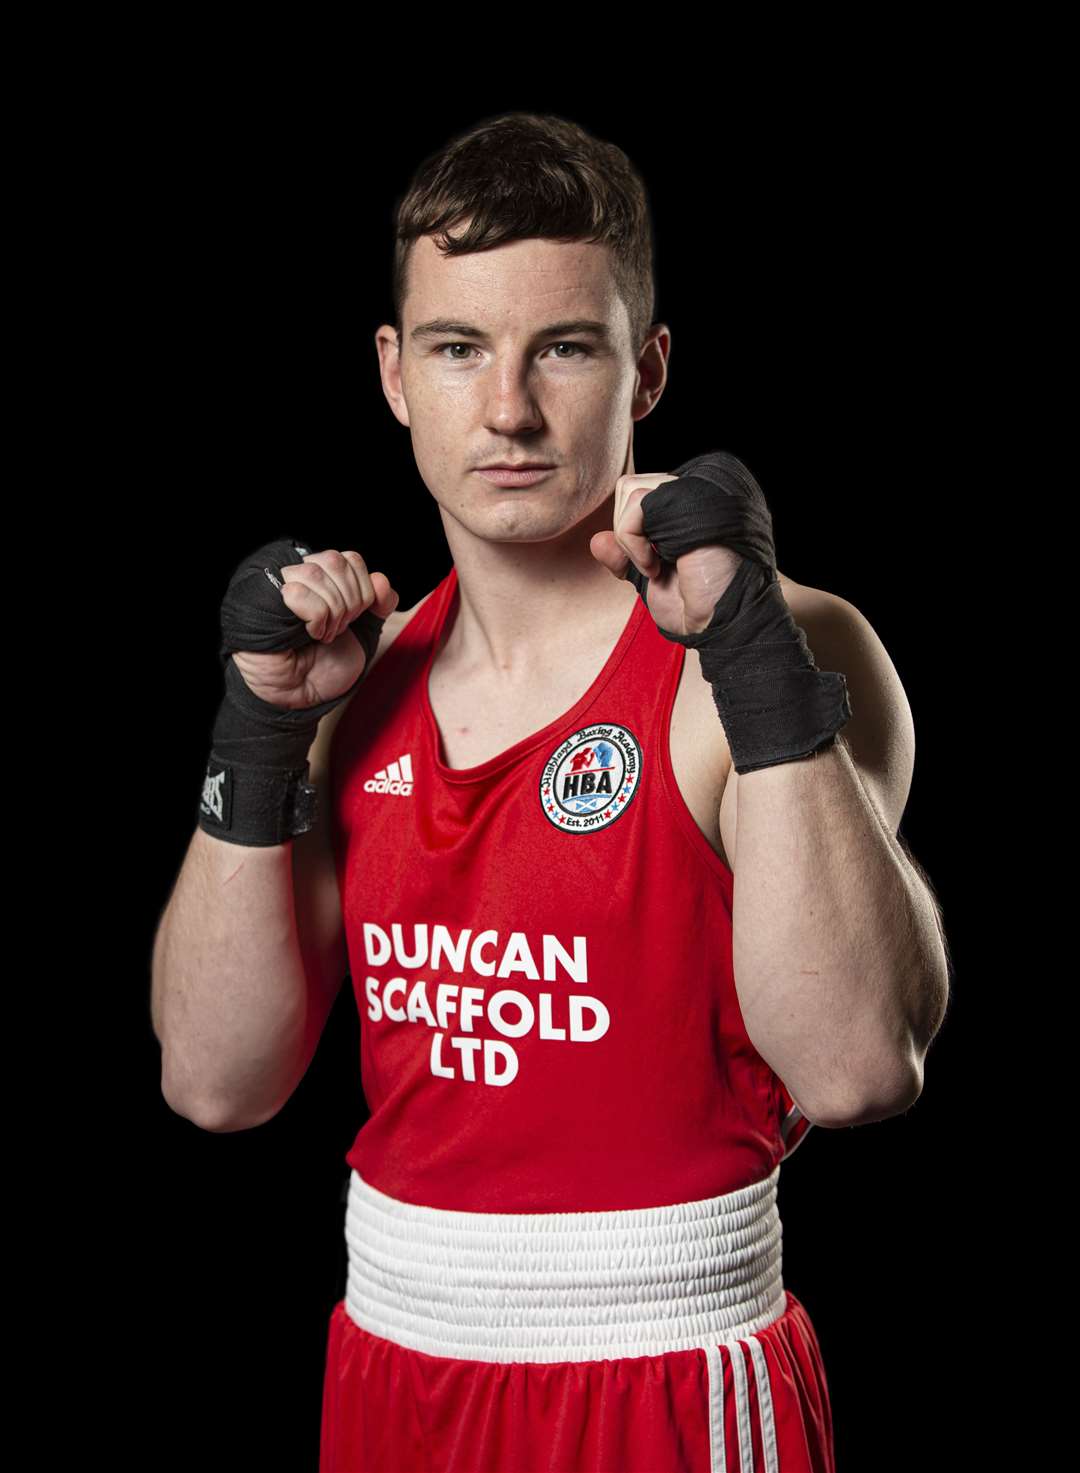 Highland Boxing Academy's Steven Munro (26), from Tain, secured his first Title at the weekend securing the Elite men's -81kg light heavyweight Northern District Title. Picture: David Rothnie